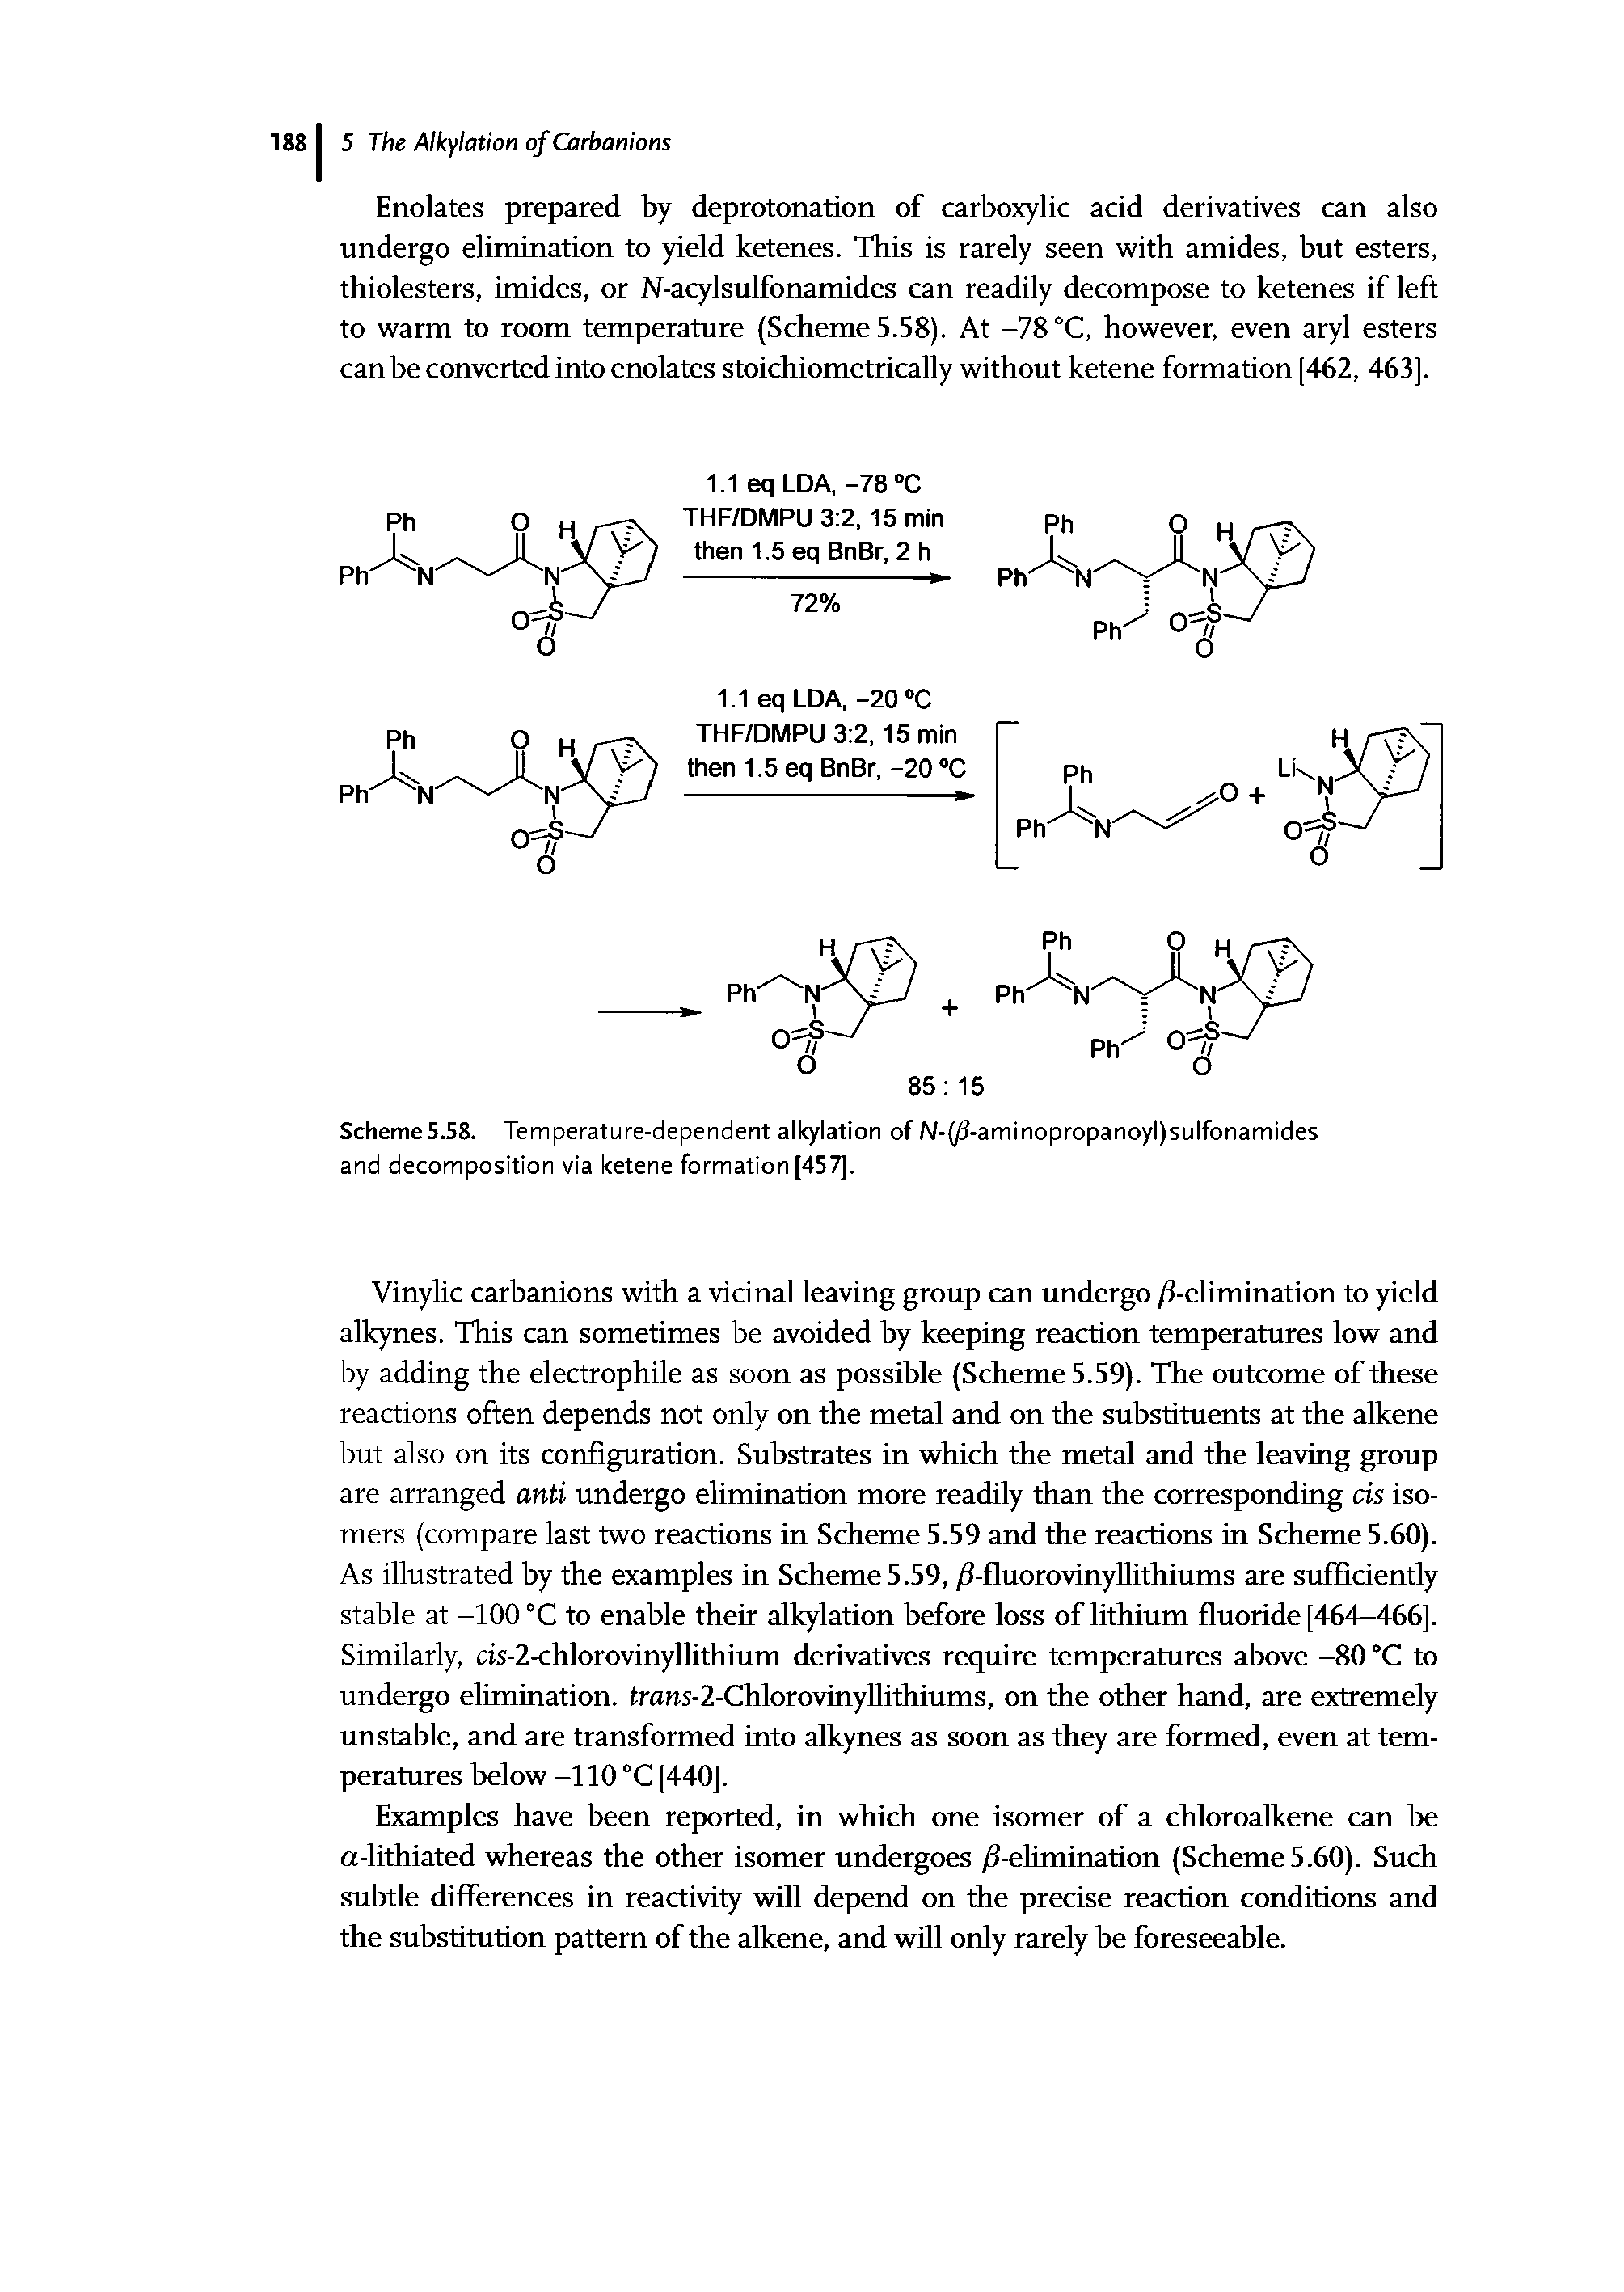 Scheme5.58. Temperature-dependent alkylation of N-(/3-aminopropanoyl)sulfonamides and decomposition via ketene formation [457].